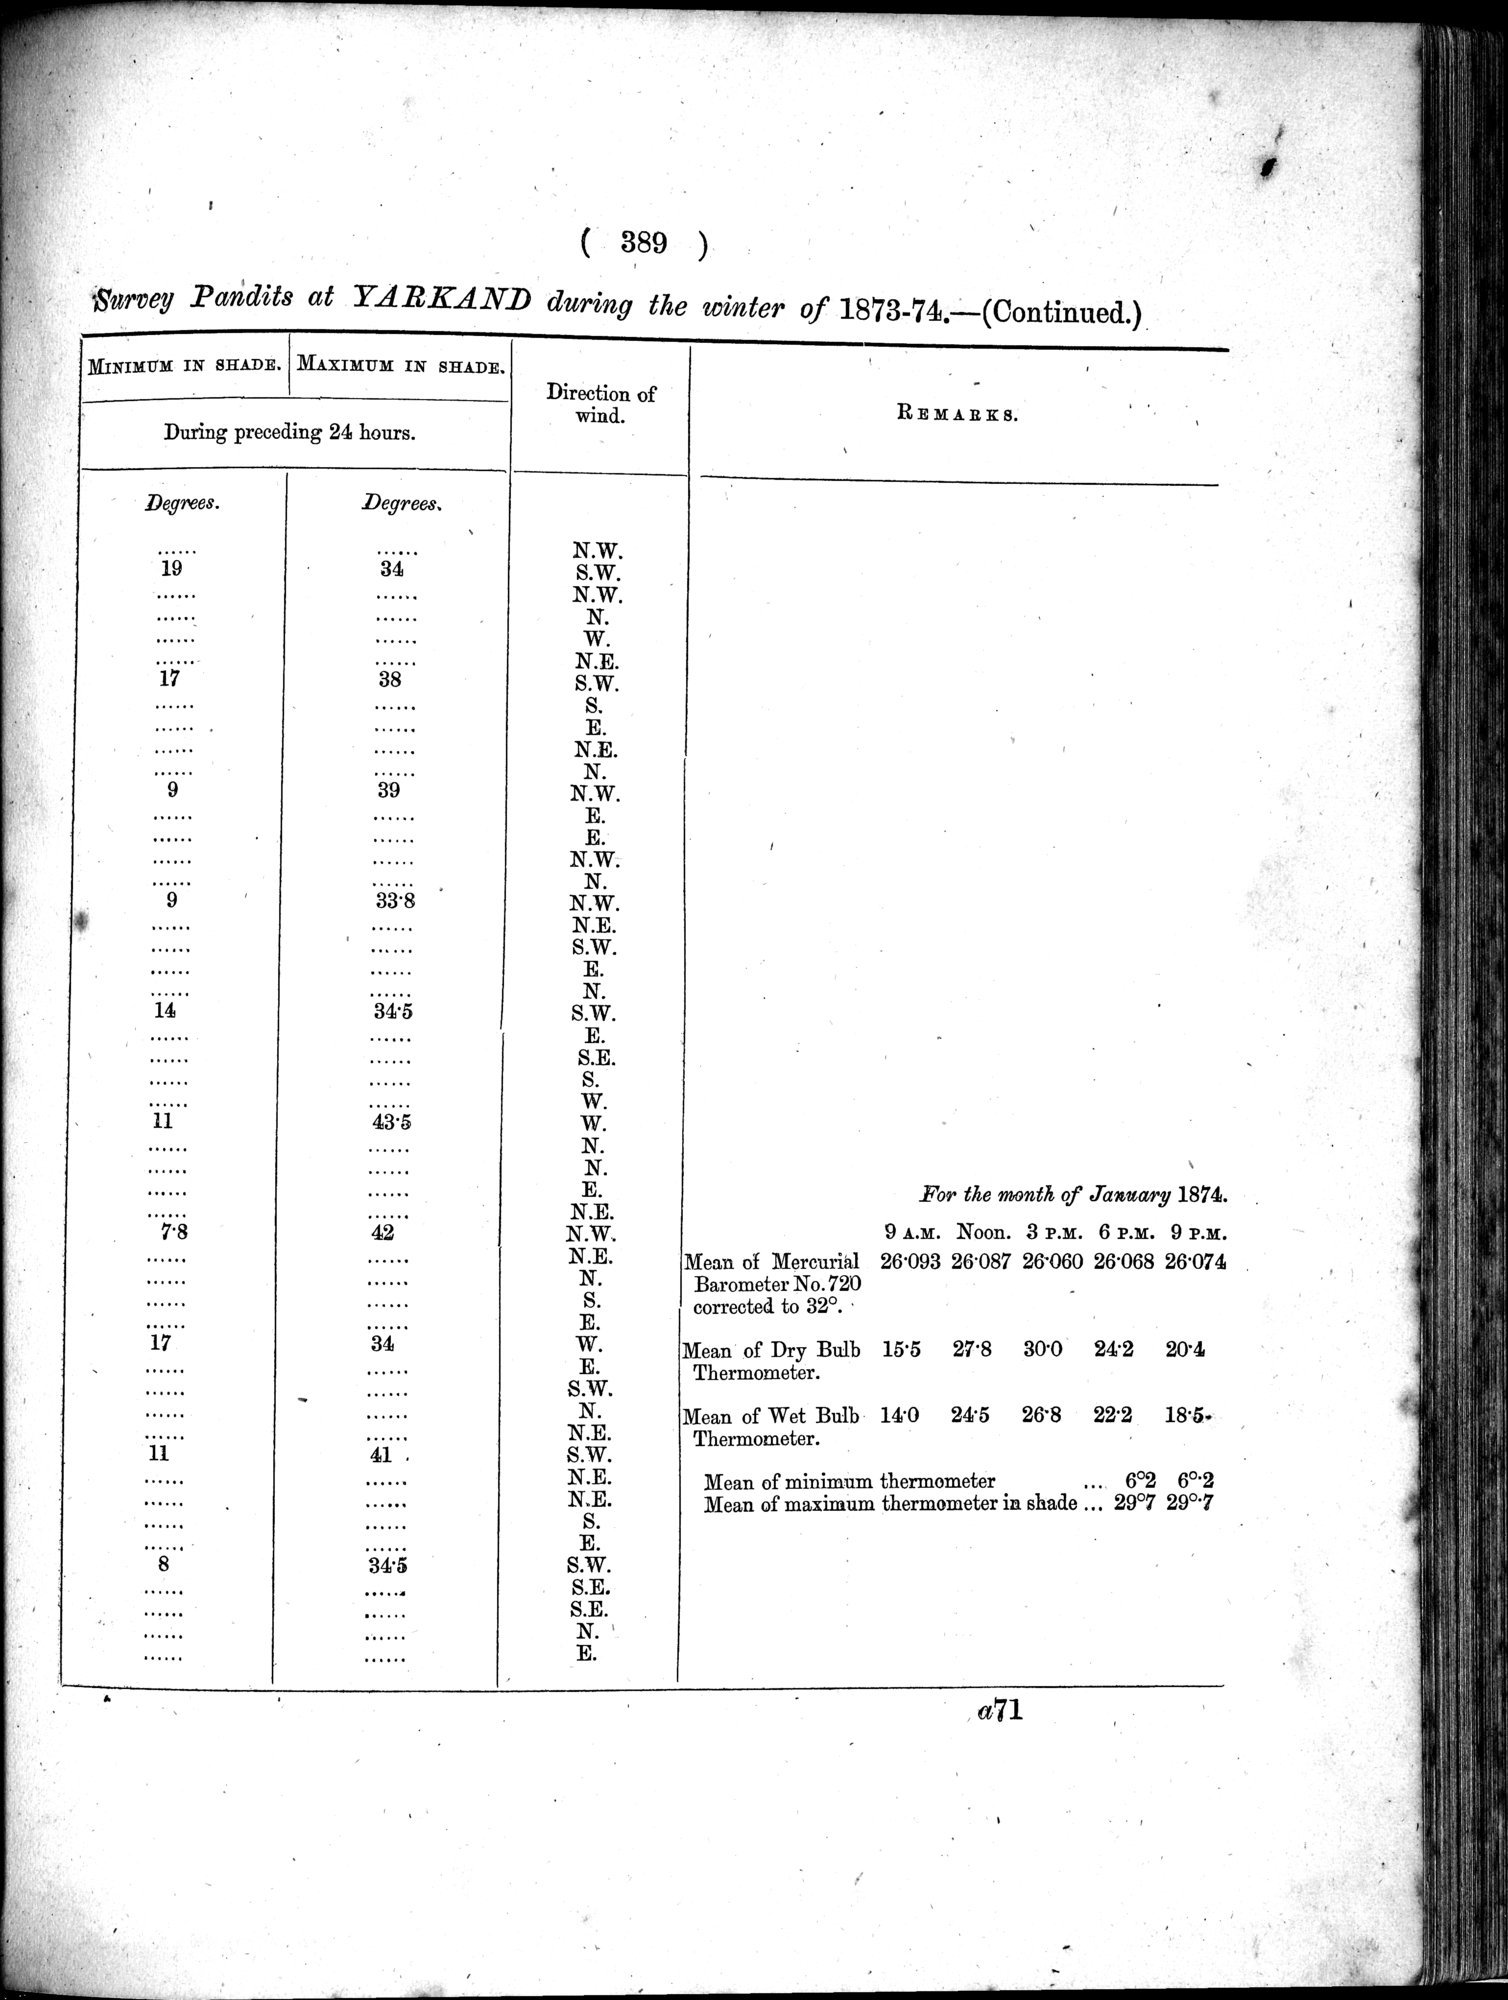 Report of a Mission to Yarkund in 1873 : vol.1 / Page 523 (Grayscale High Resolution Image)